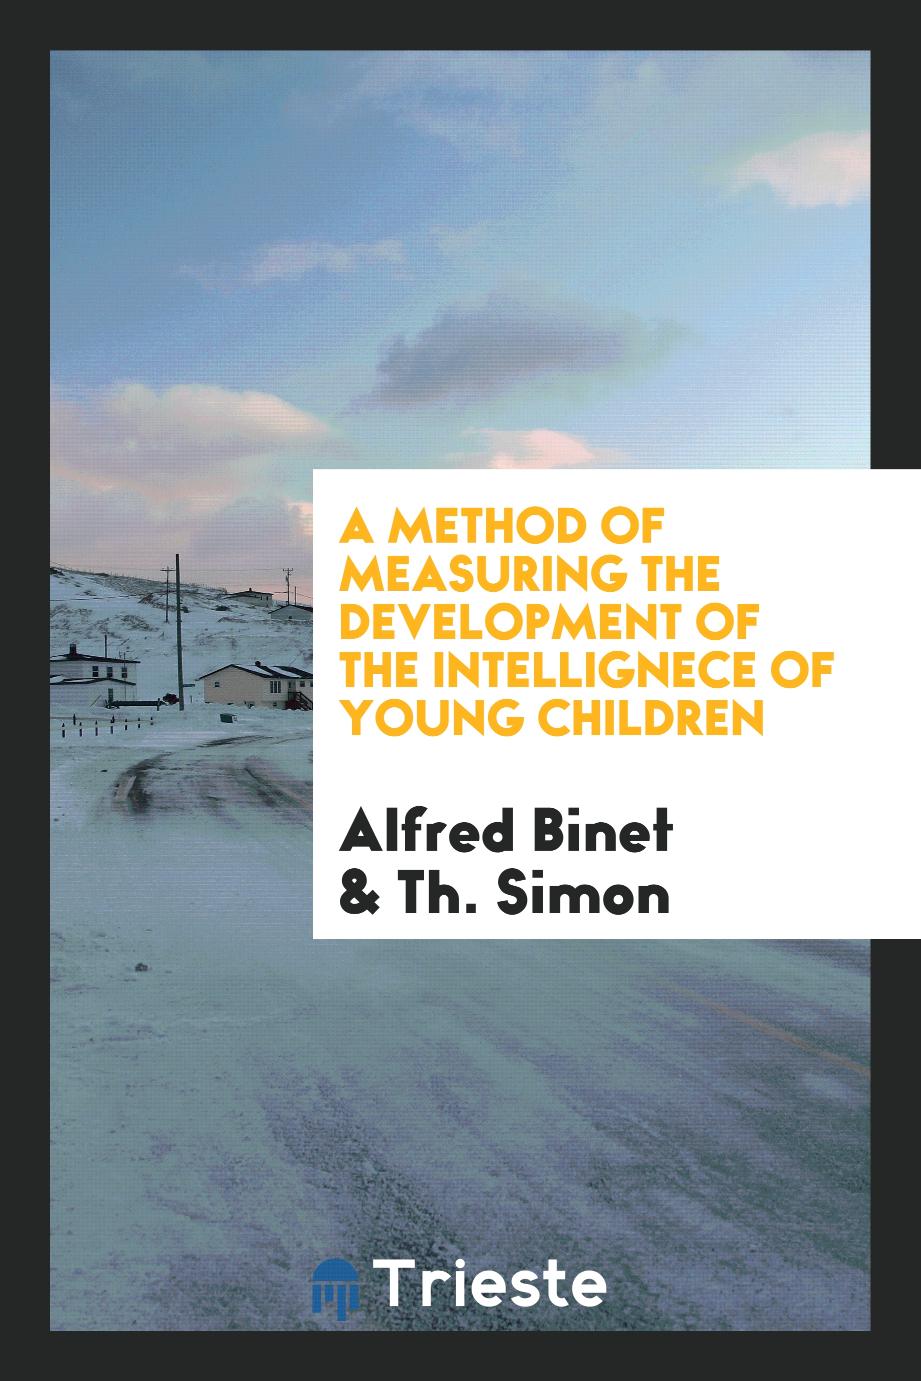 Alfred Binet, Th. Simon - A Method of Measuring the Development of the Intellignece of Young Children